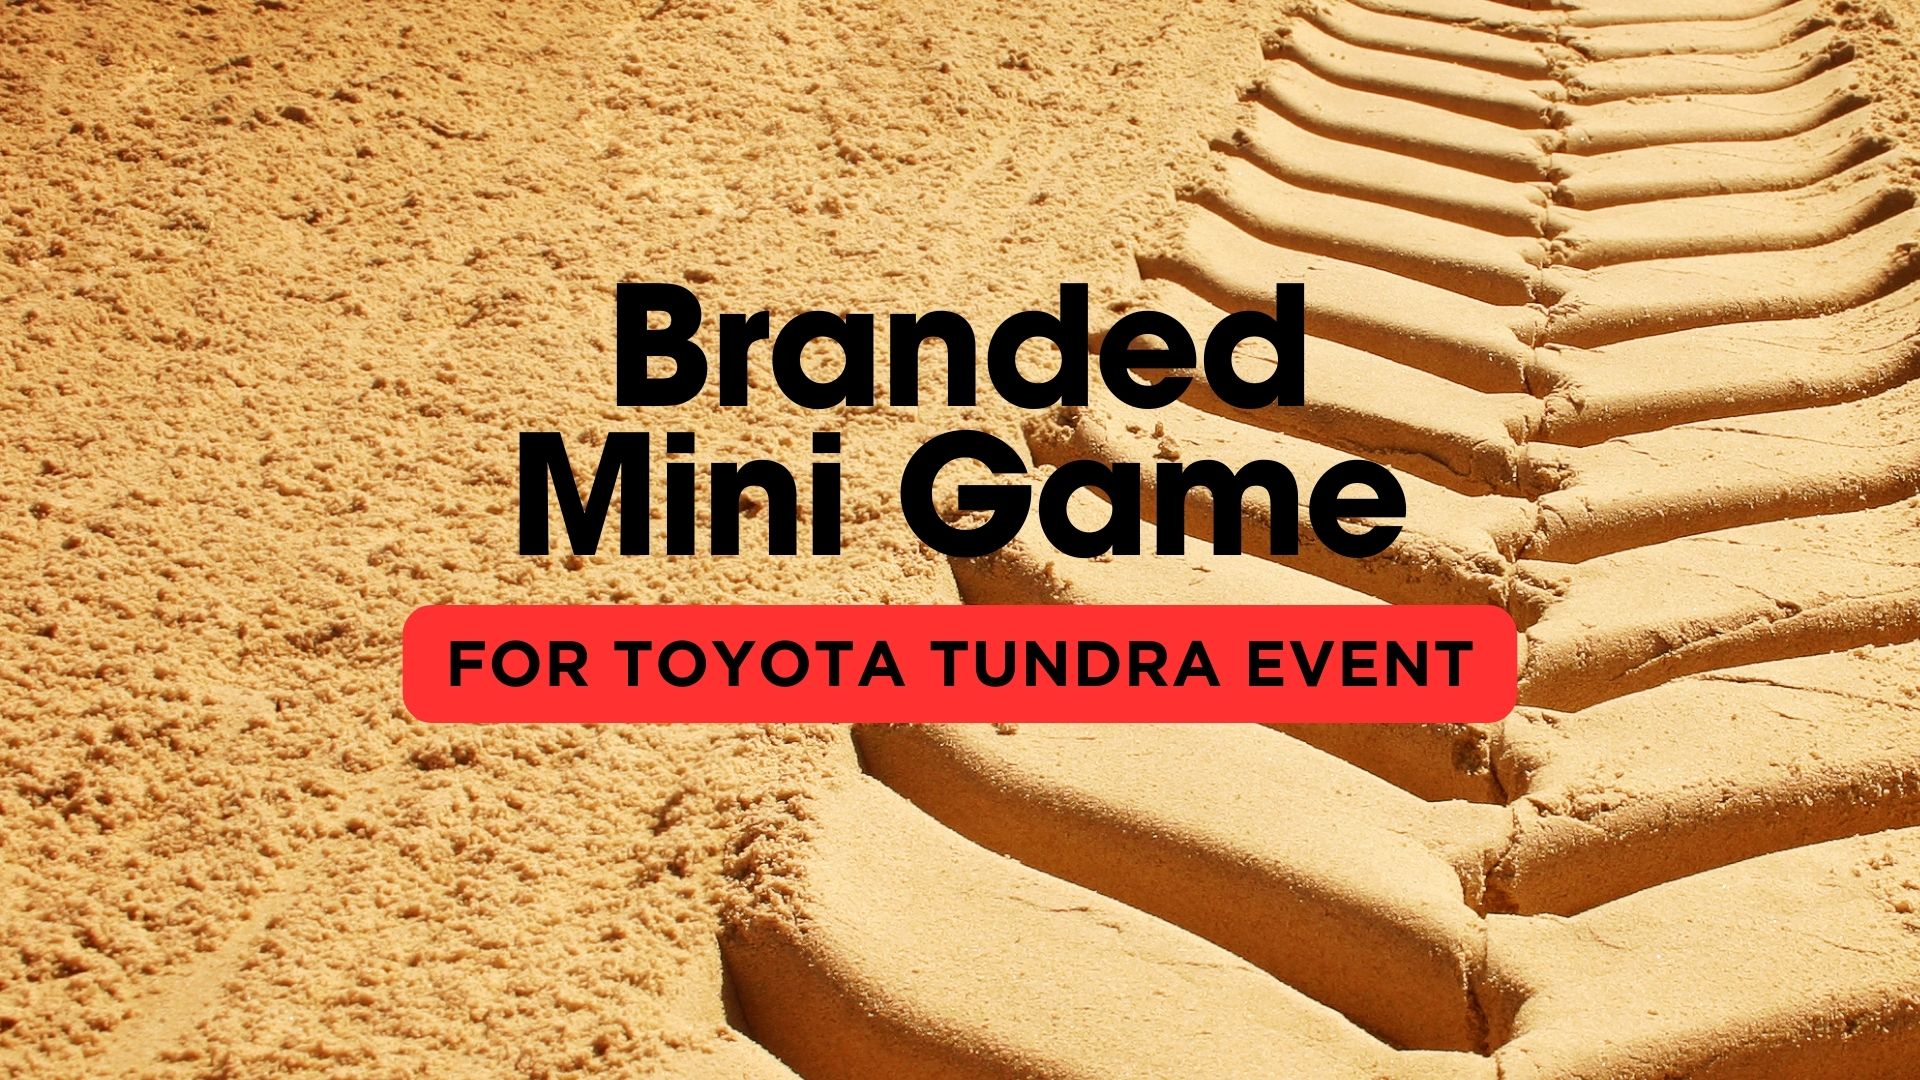 Branded Mini-Game for Toyota Tundra Event